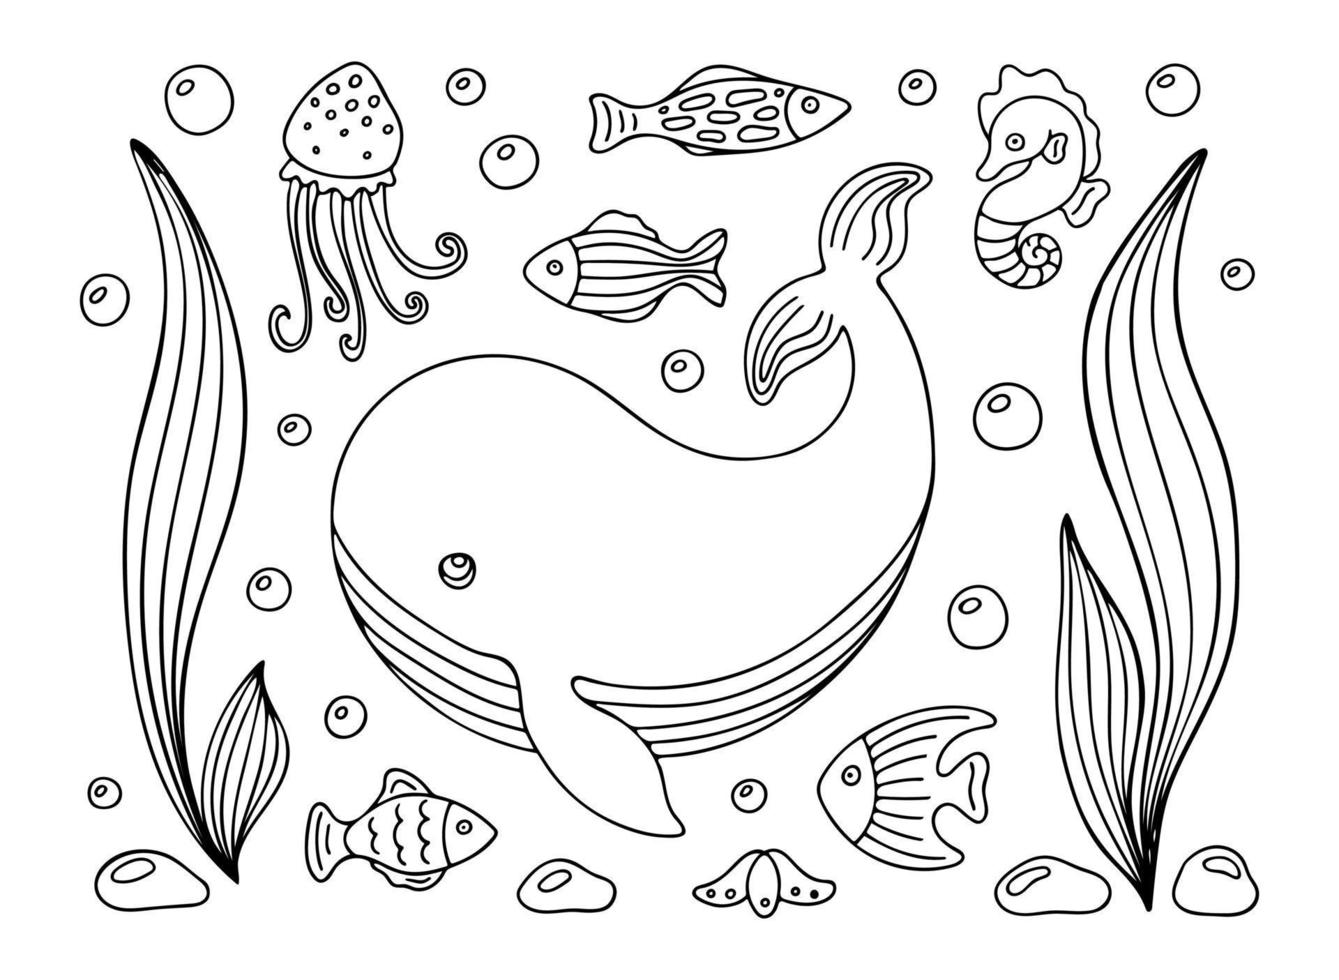 Coloring page with whale, fishes and jellyfish swimming between bubbles and algae. Hand drawn vector contoured black and white illustration. Design template for kids coloring book, poster or postcard.